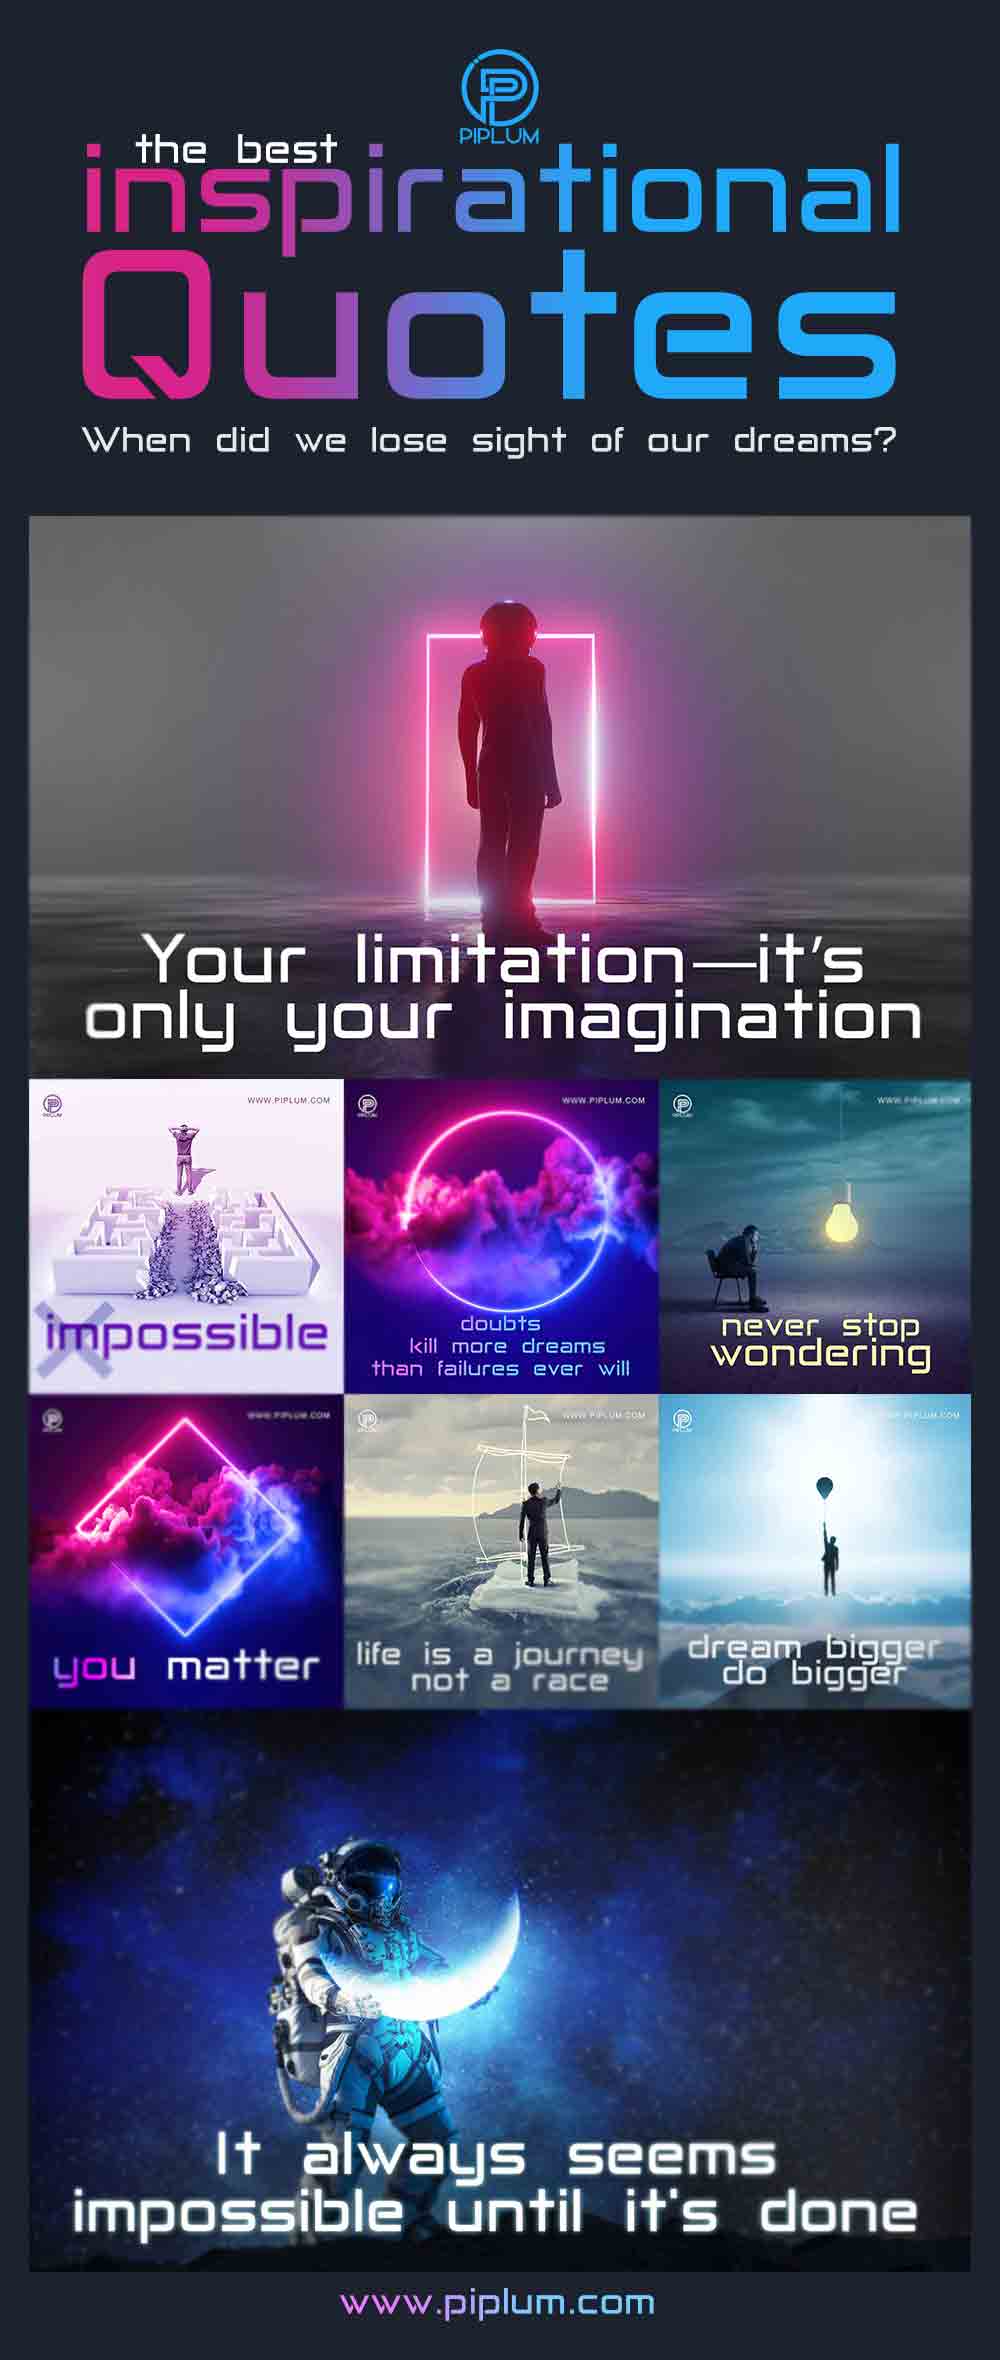 The-best-inspirational-quotes-of-all-time-Inspiring-images-and-Poster 